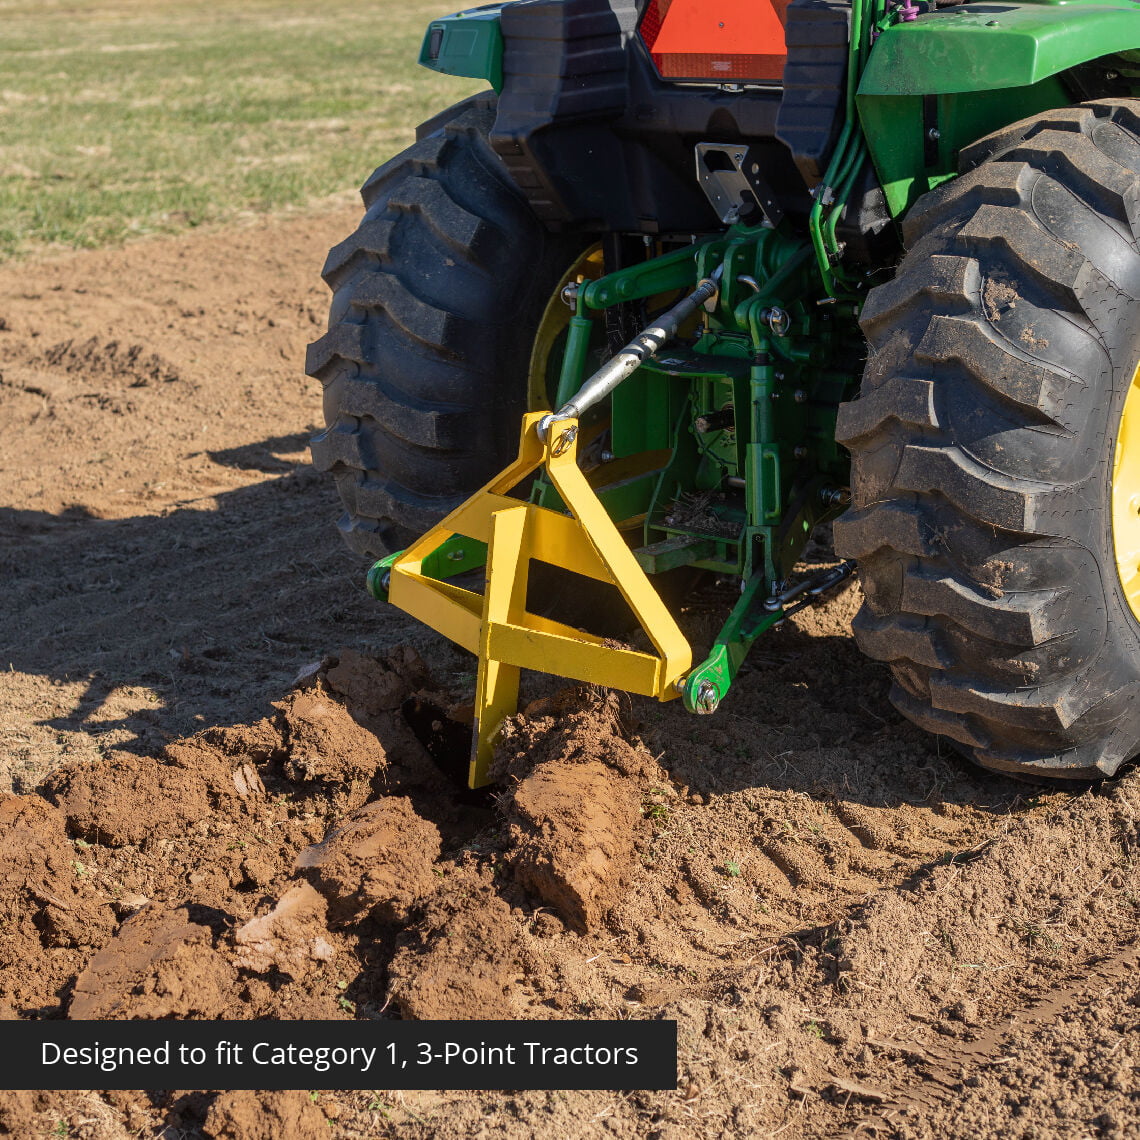 Titan Attachments Middle Buster for Cat 1 3-Point Tractors to Create Furrows and Harvest Potatoes 